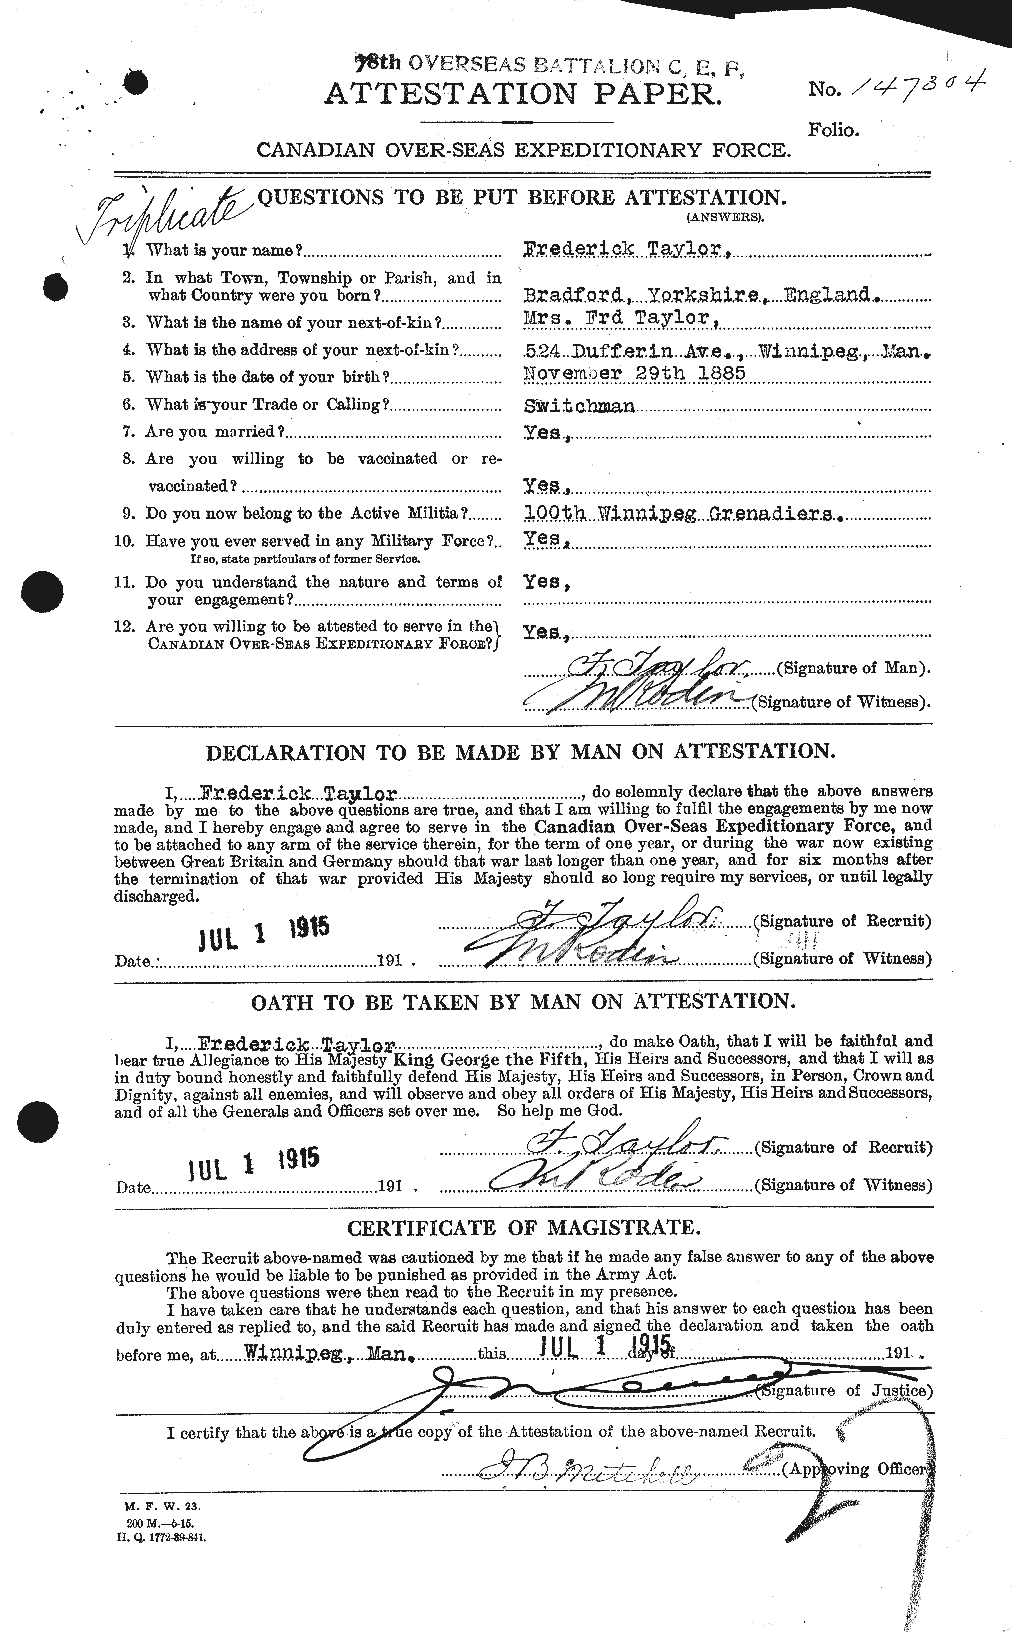 Personnel Records of the First World War - CEF 625780a